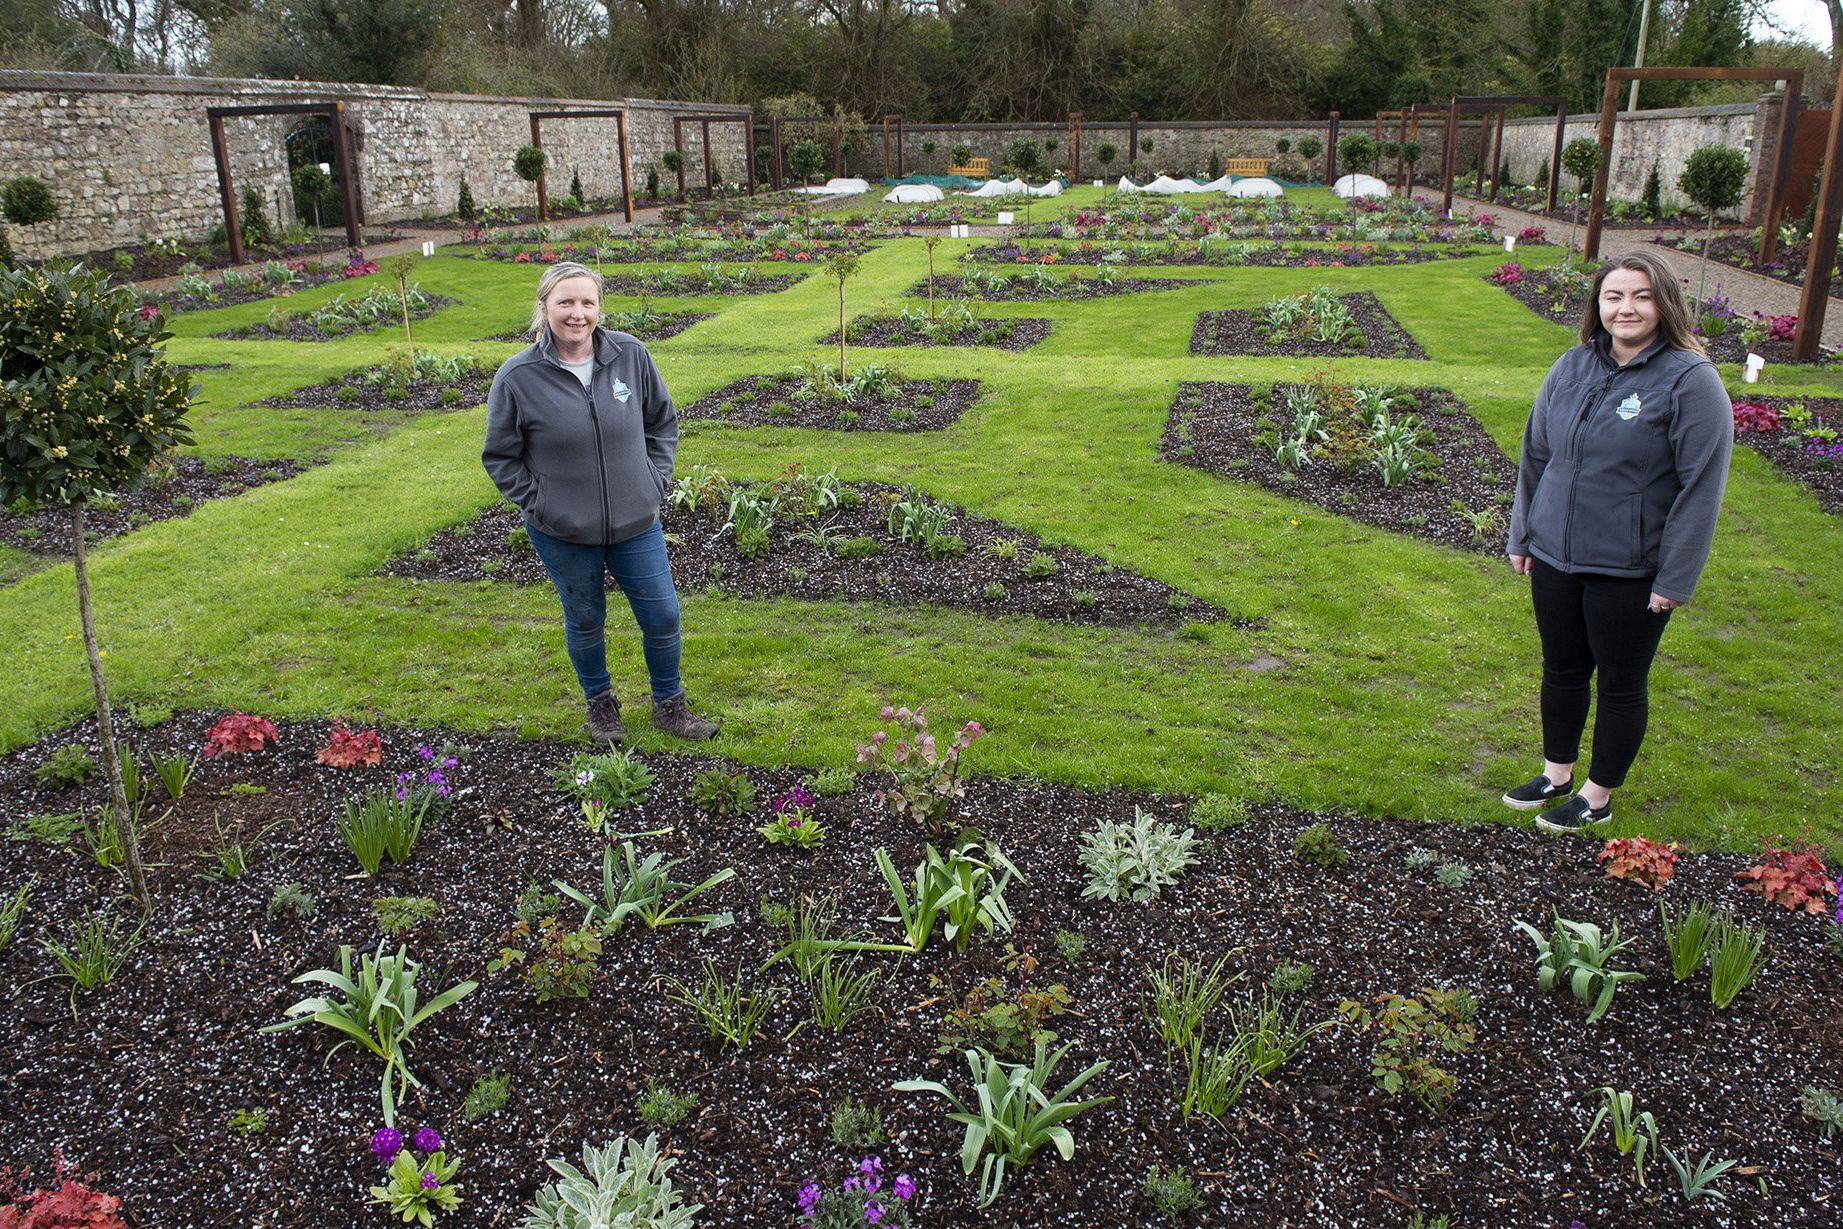 Wells House in Wexford brings 200-year-old walled garden back to splendid life